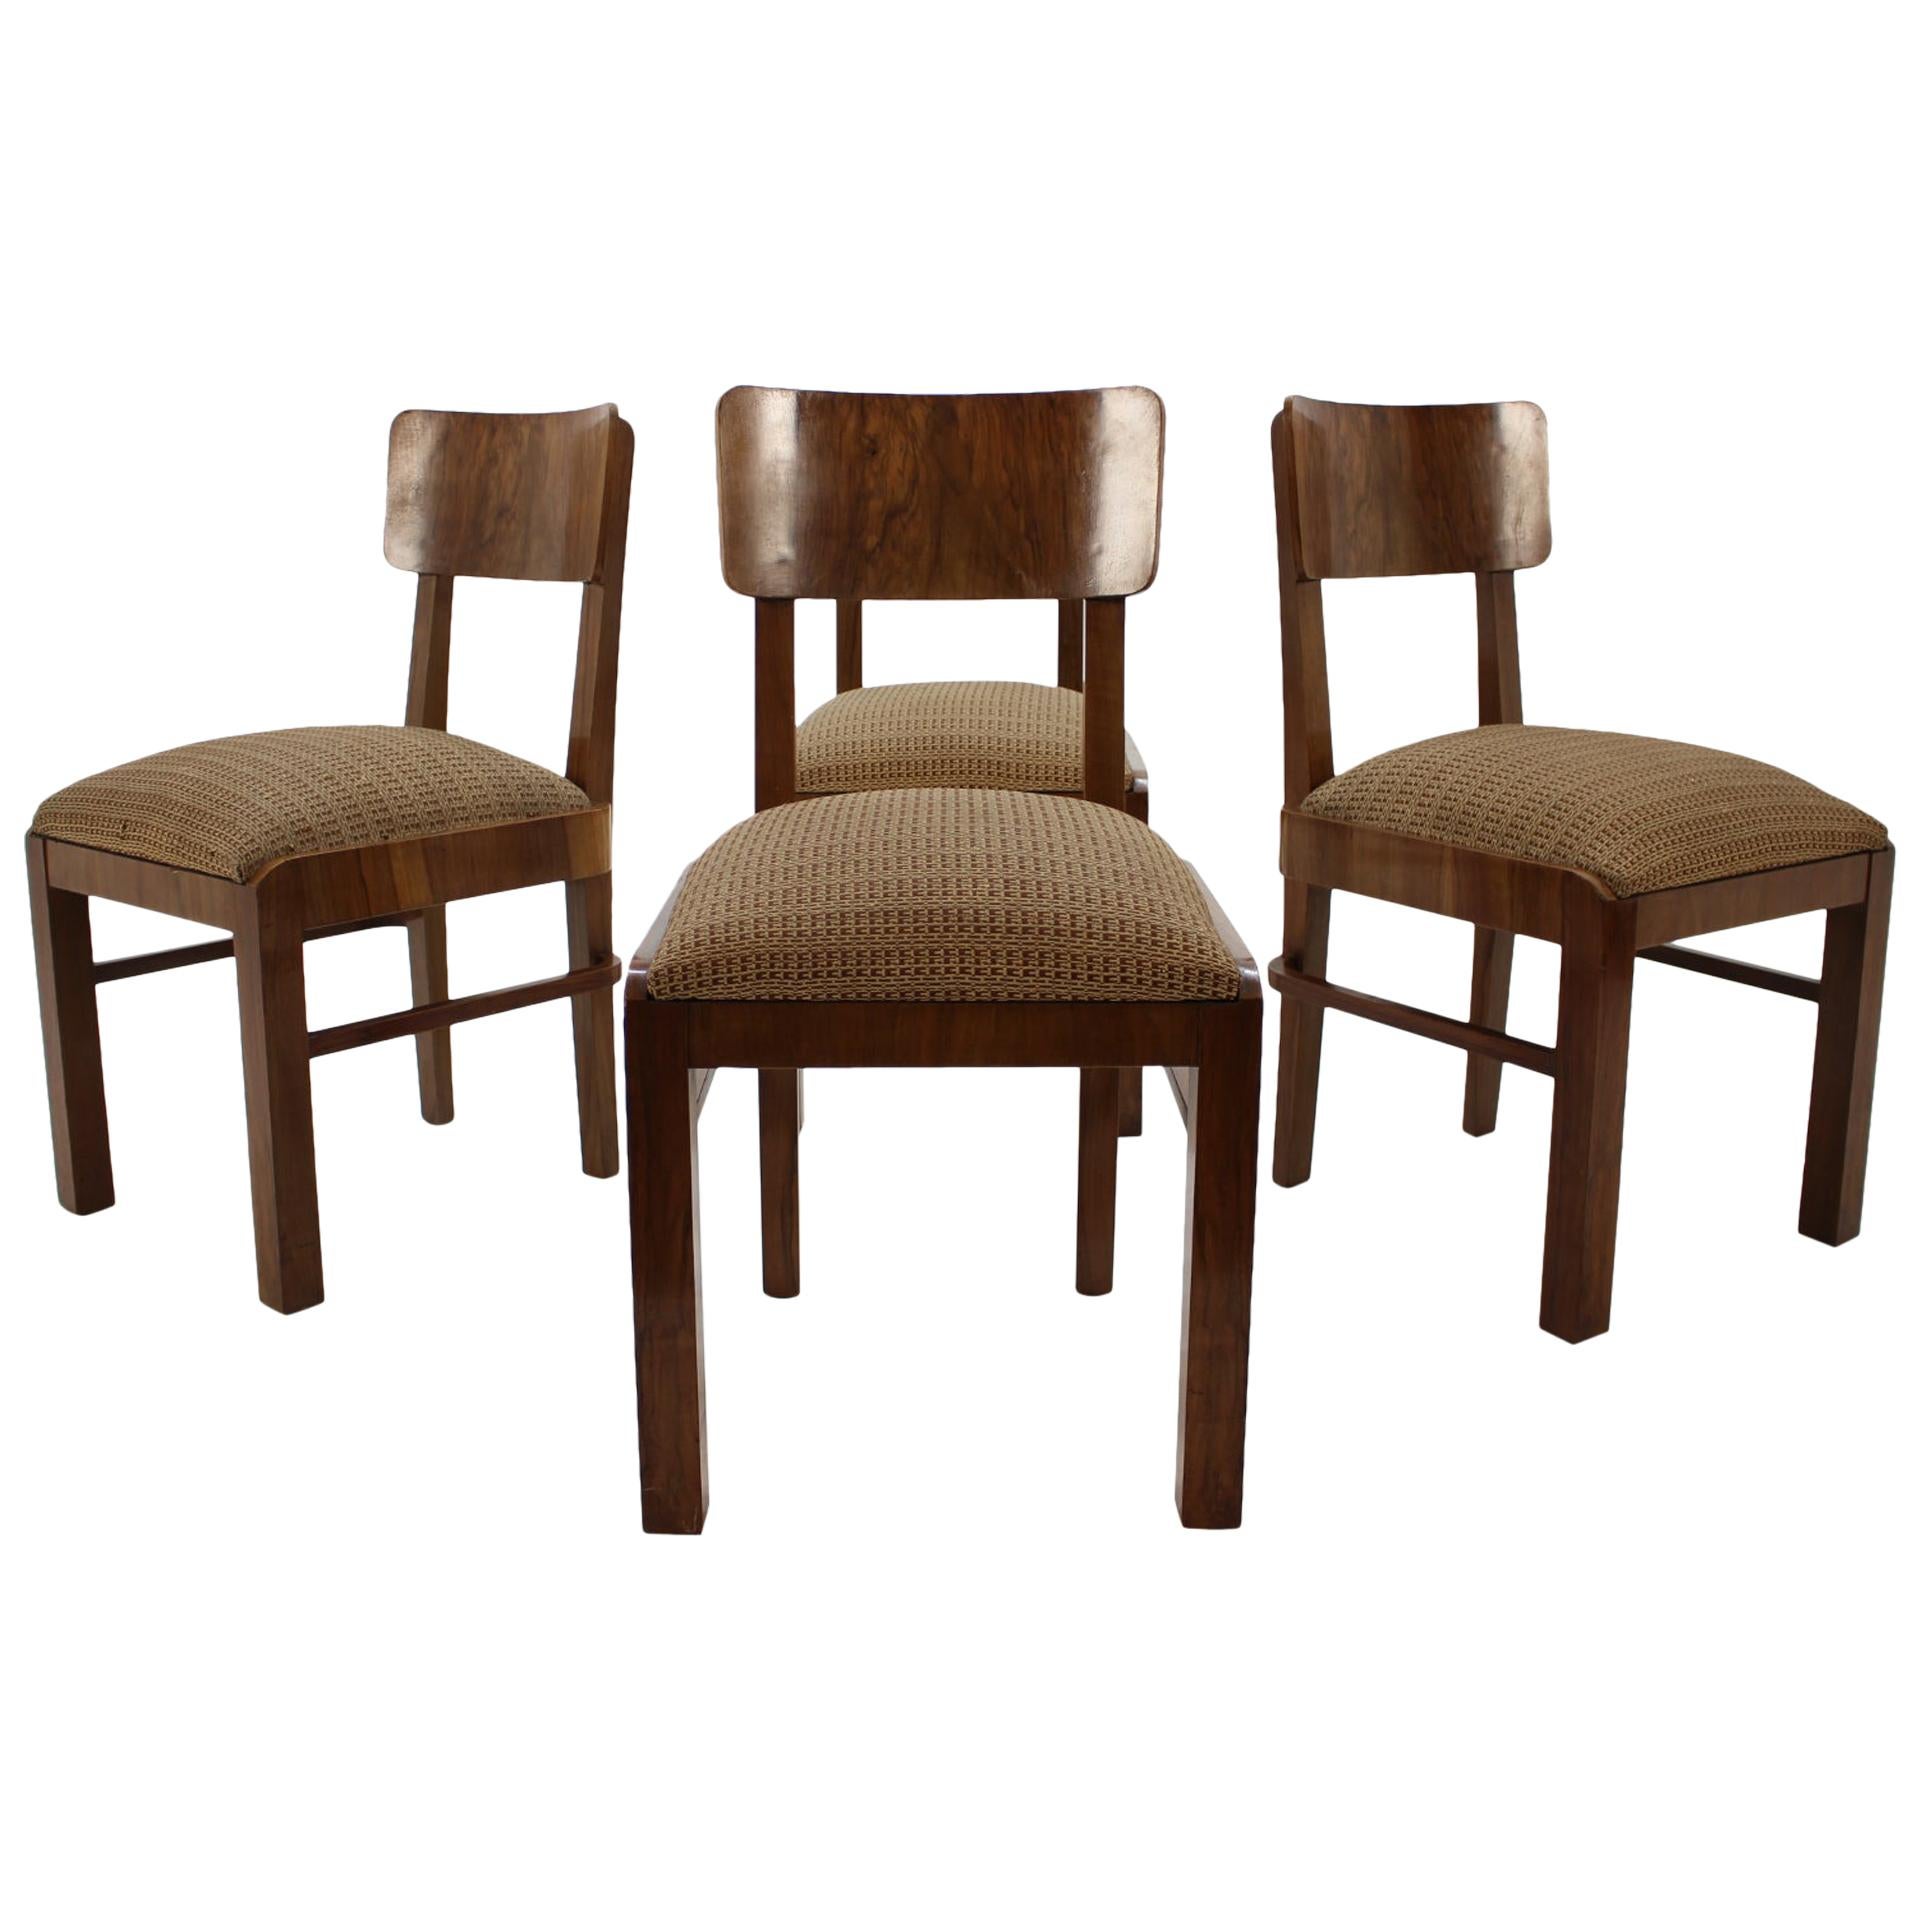 Set of Four Art Deco Chairs, 1930s